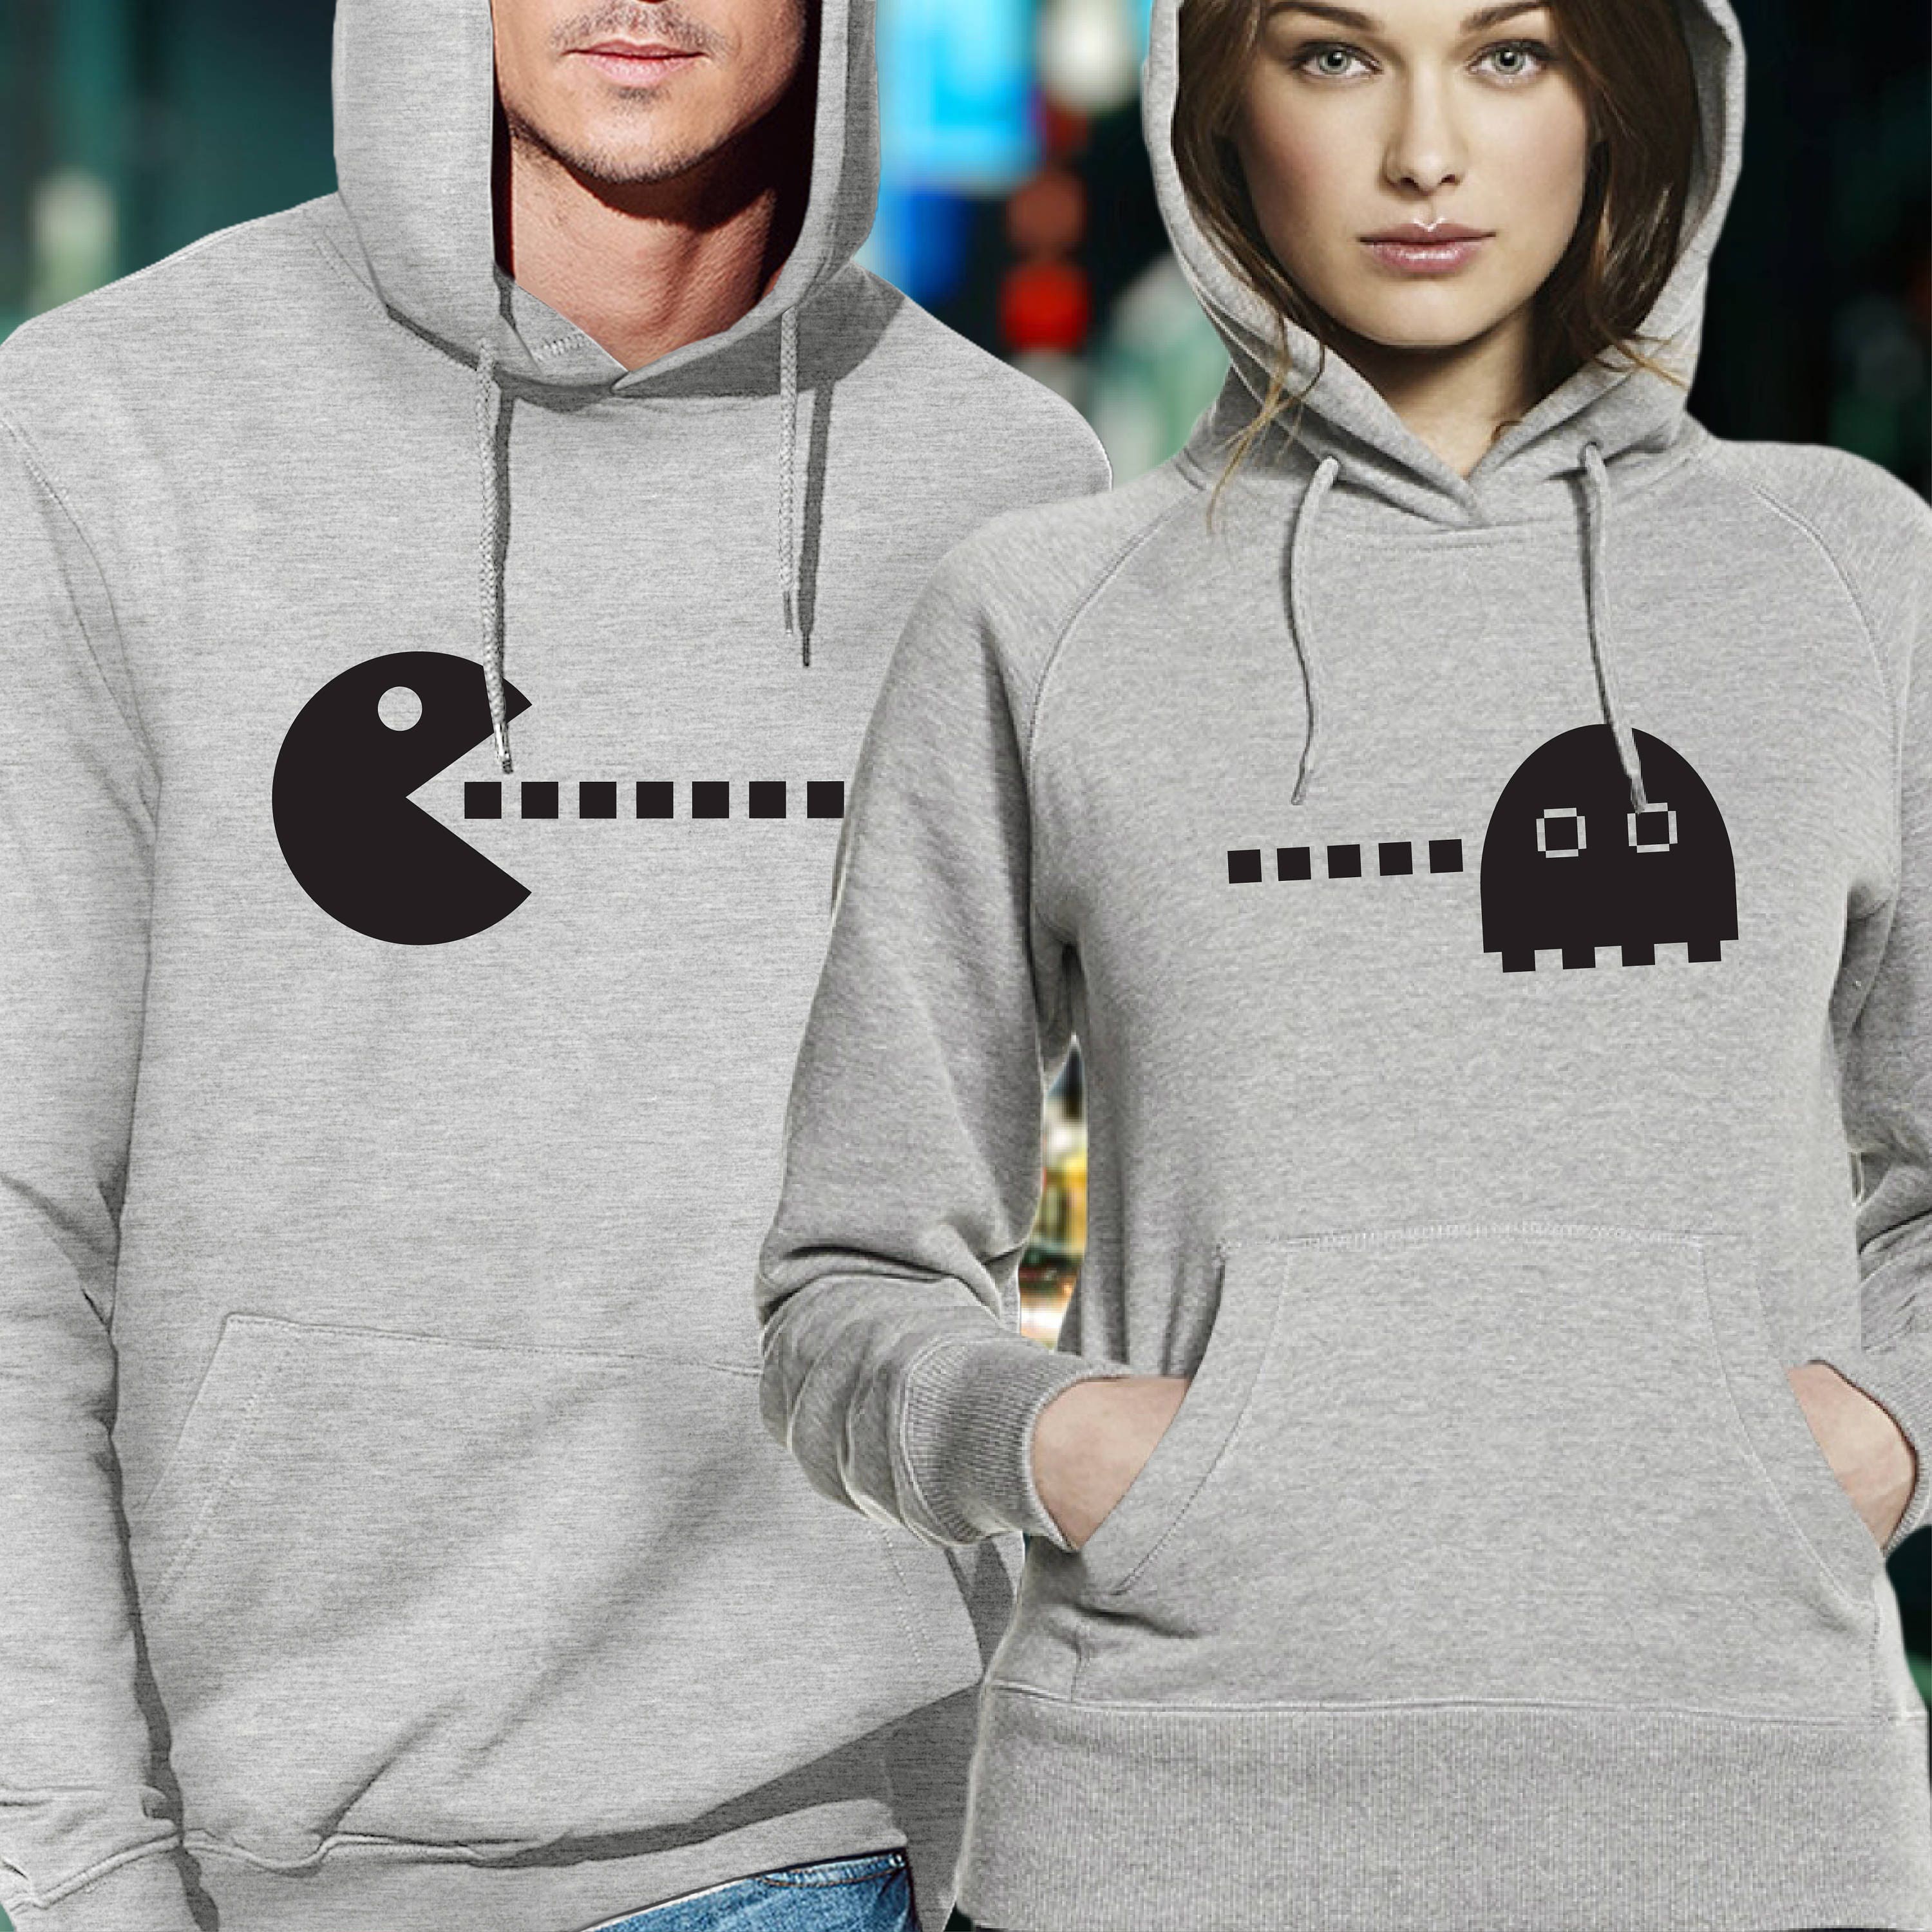 Pärchen Pullover Couple Hoodies Couples Sweatshirt His and | Etsy